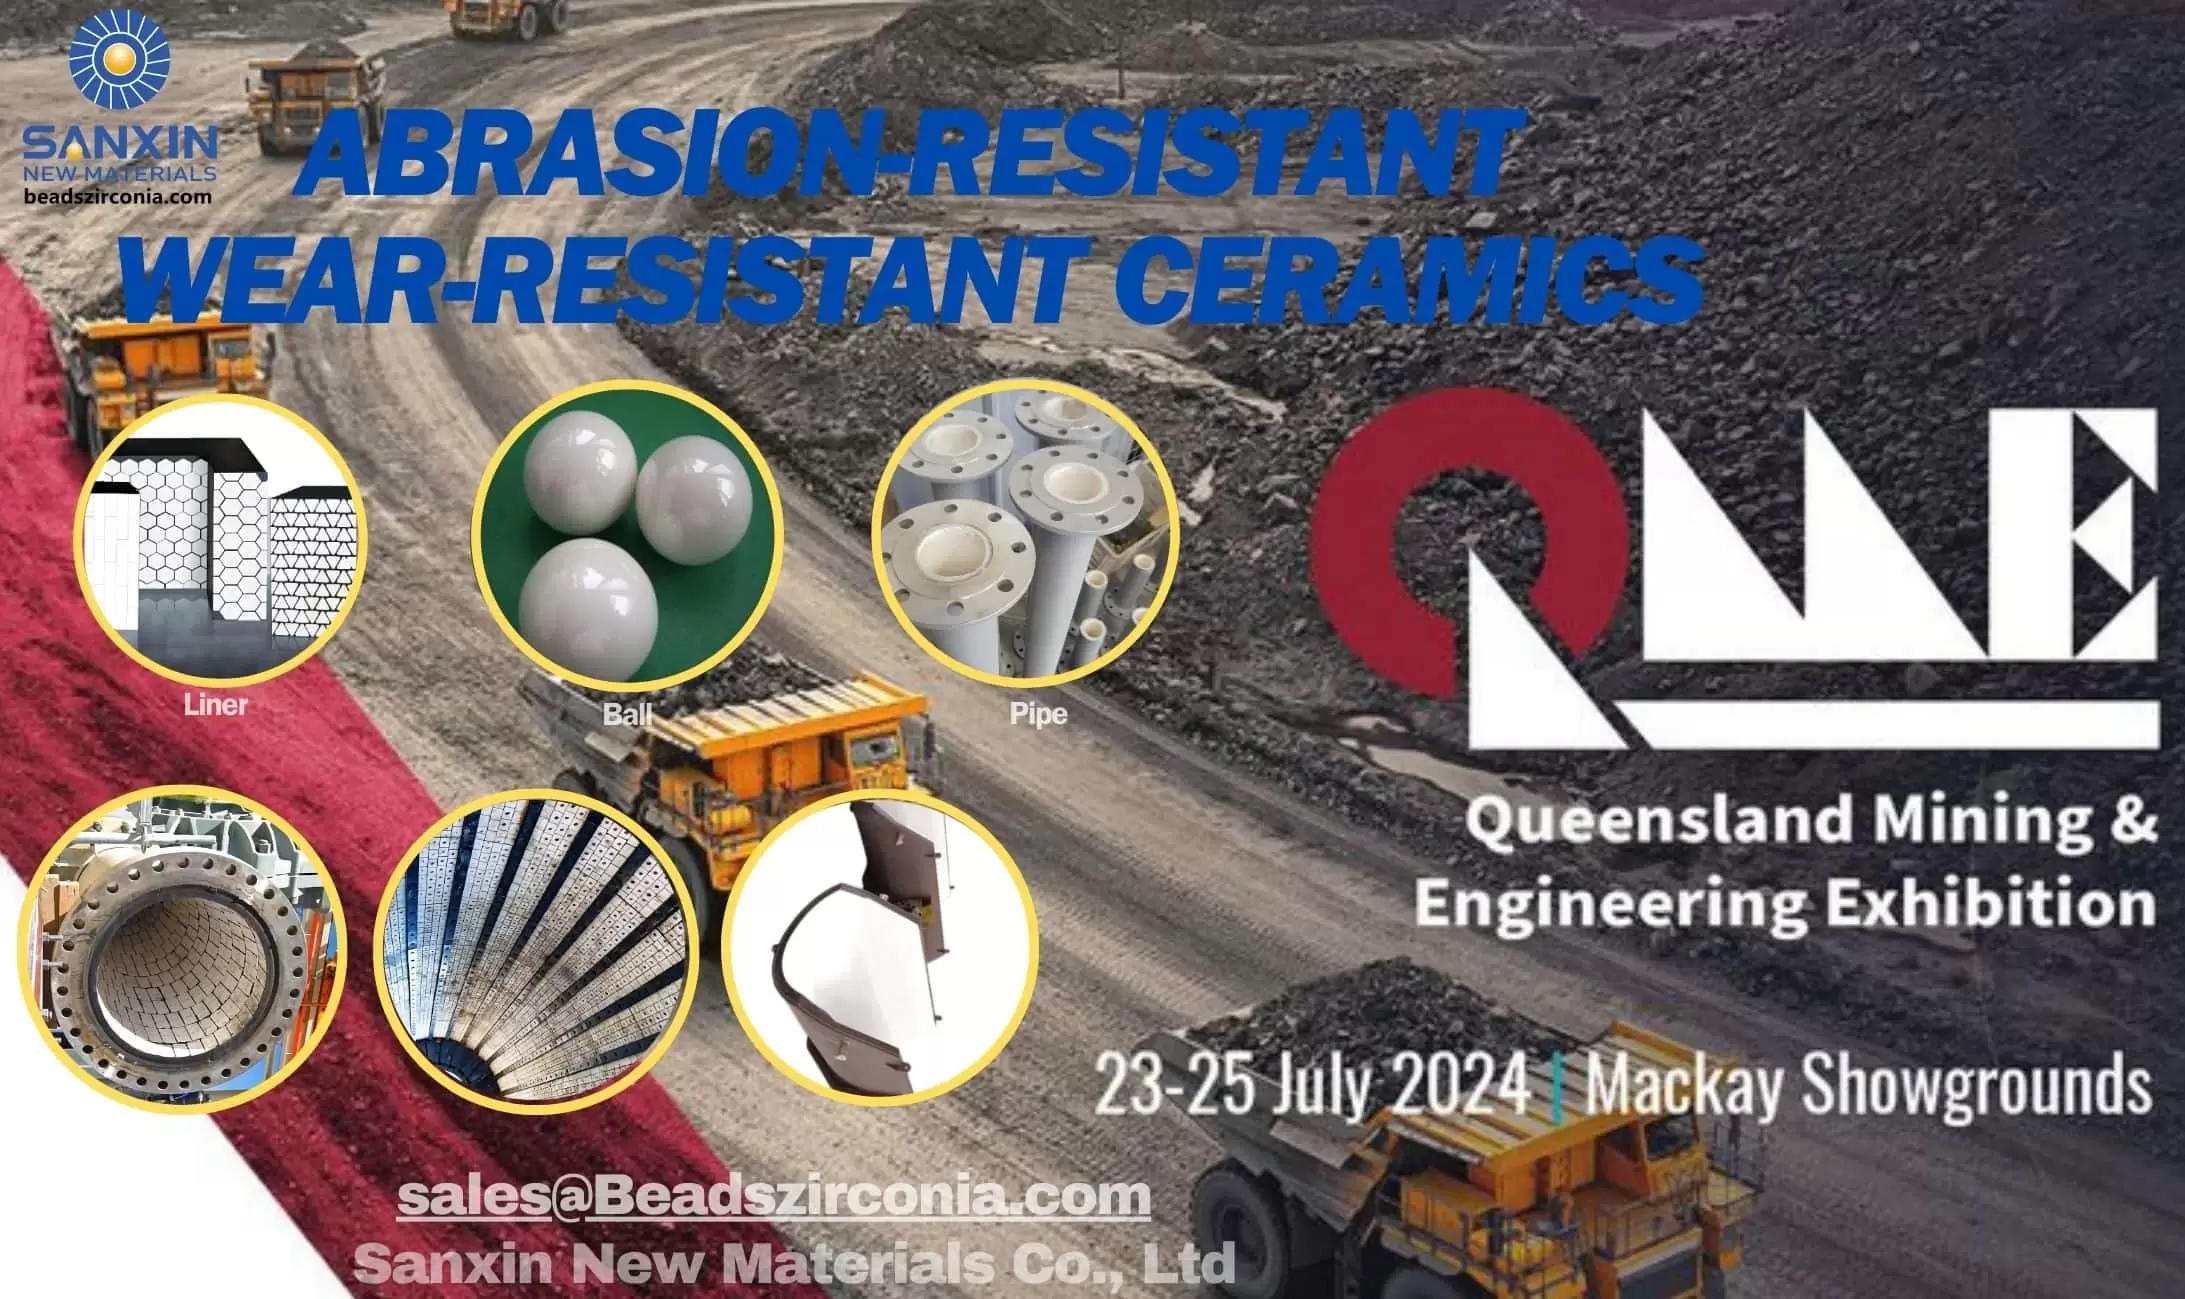 Queensland Mining and Engineering Expo 2024: rencontrez Sanxin New Materials Co., Ltd au Stand A142